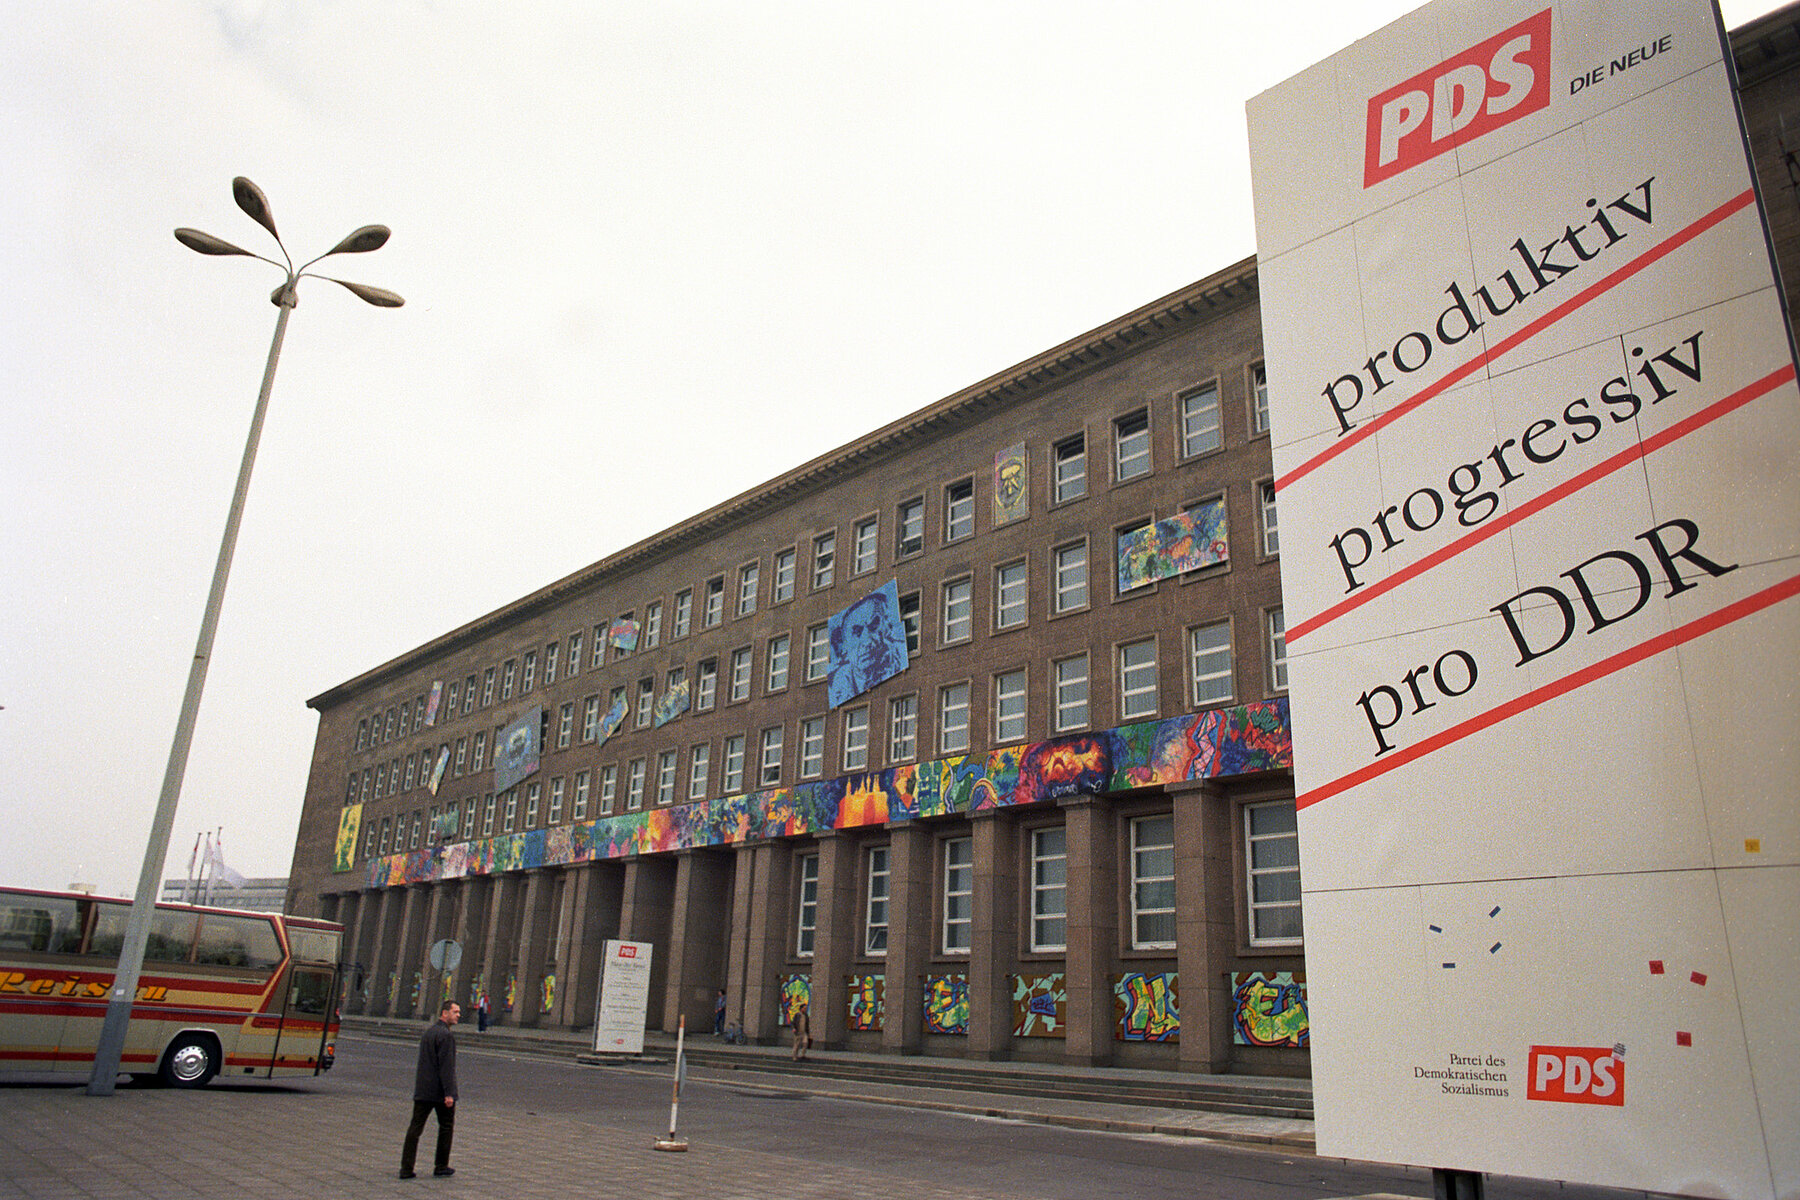 A large advertisement poster for the PDS stood in front of the Haus am Werderschen Markt. A slogan on the poster reads: "productive, progressive, pro GDR".